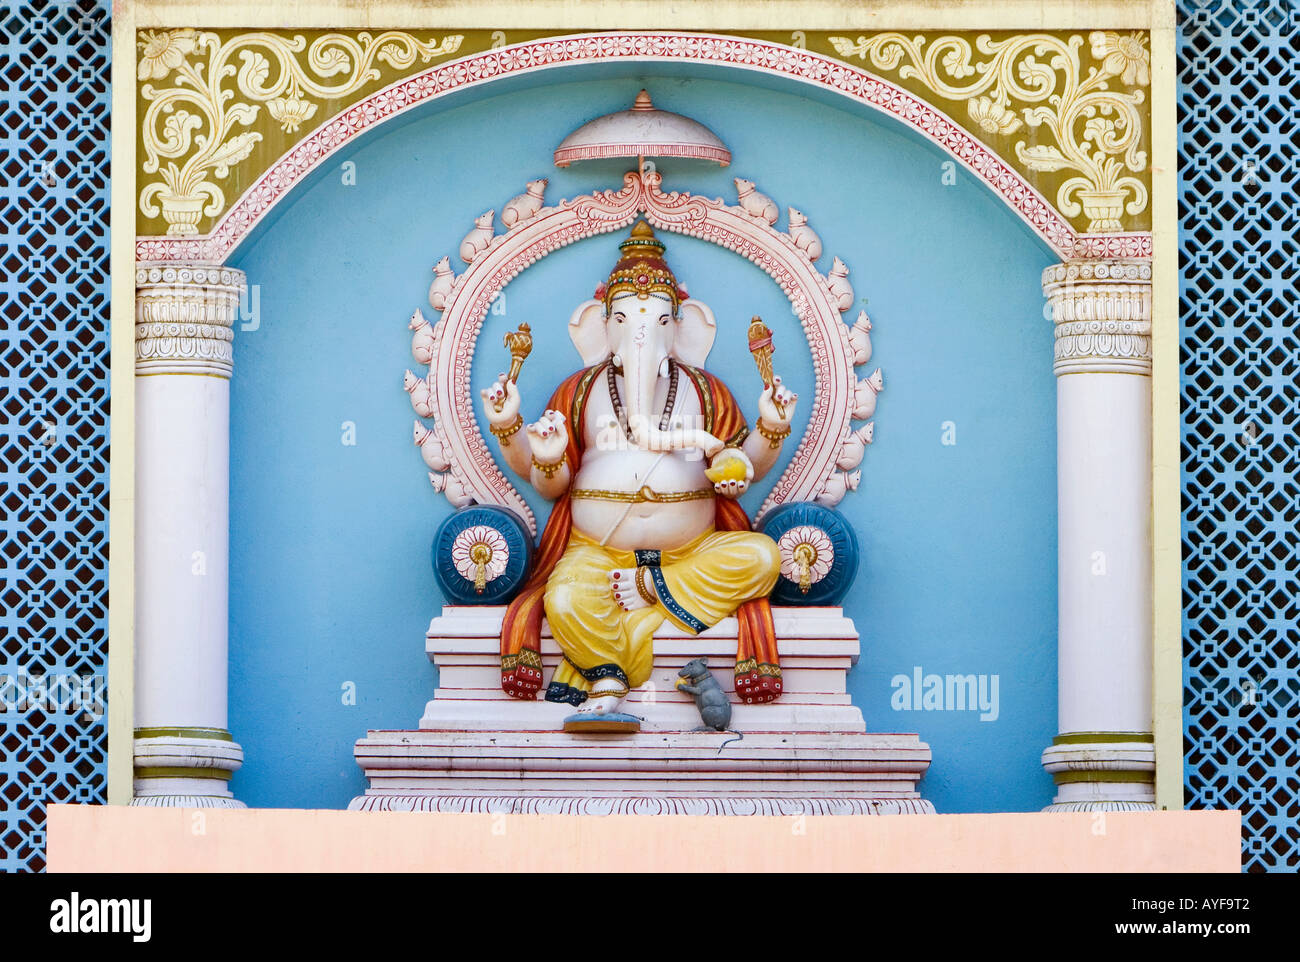 Ganesha statue adorning the front of a university building in the Southern Indian town of Puttaparthi. Andhra Pradesh, India Stock Photo